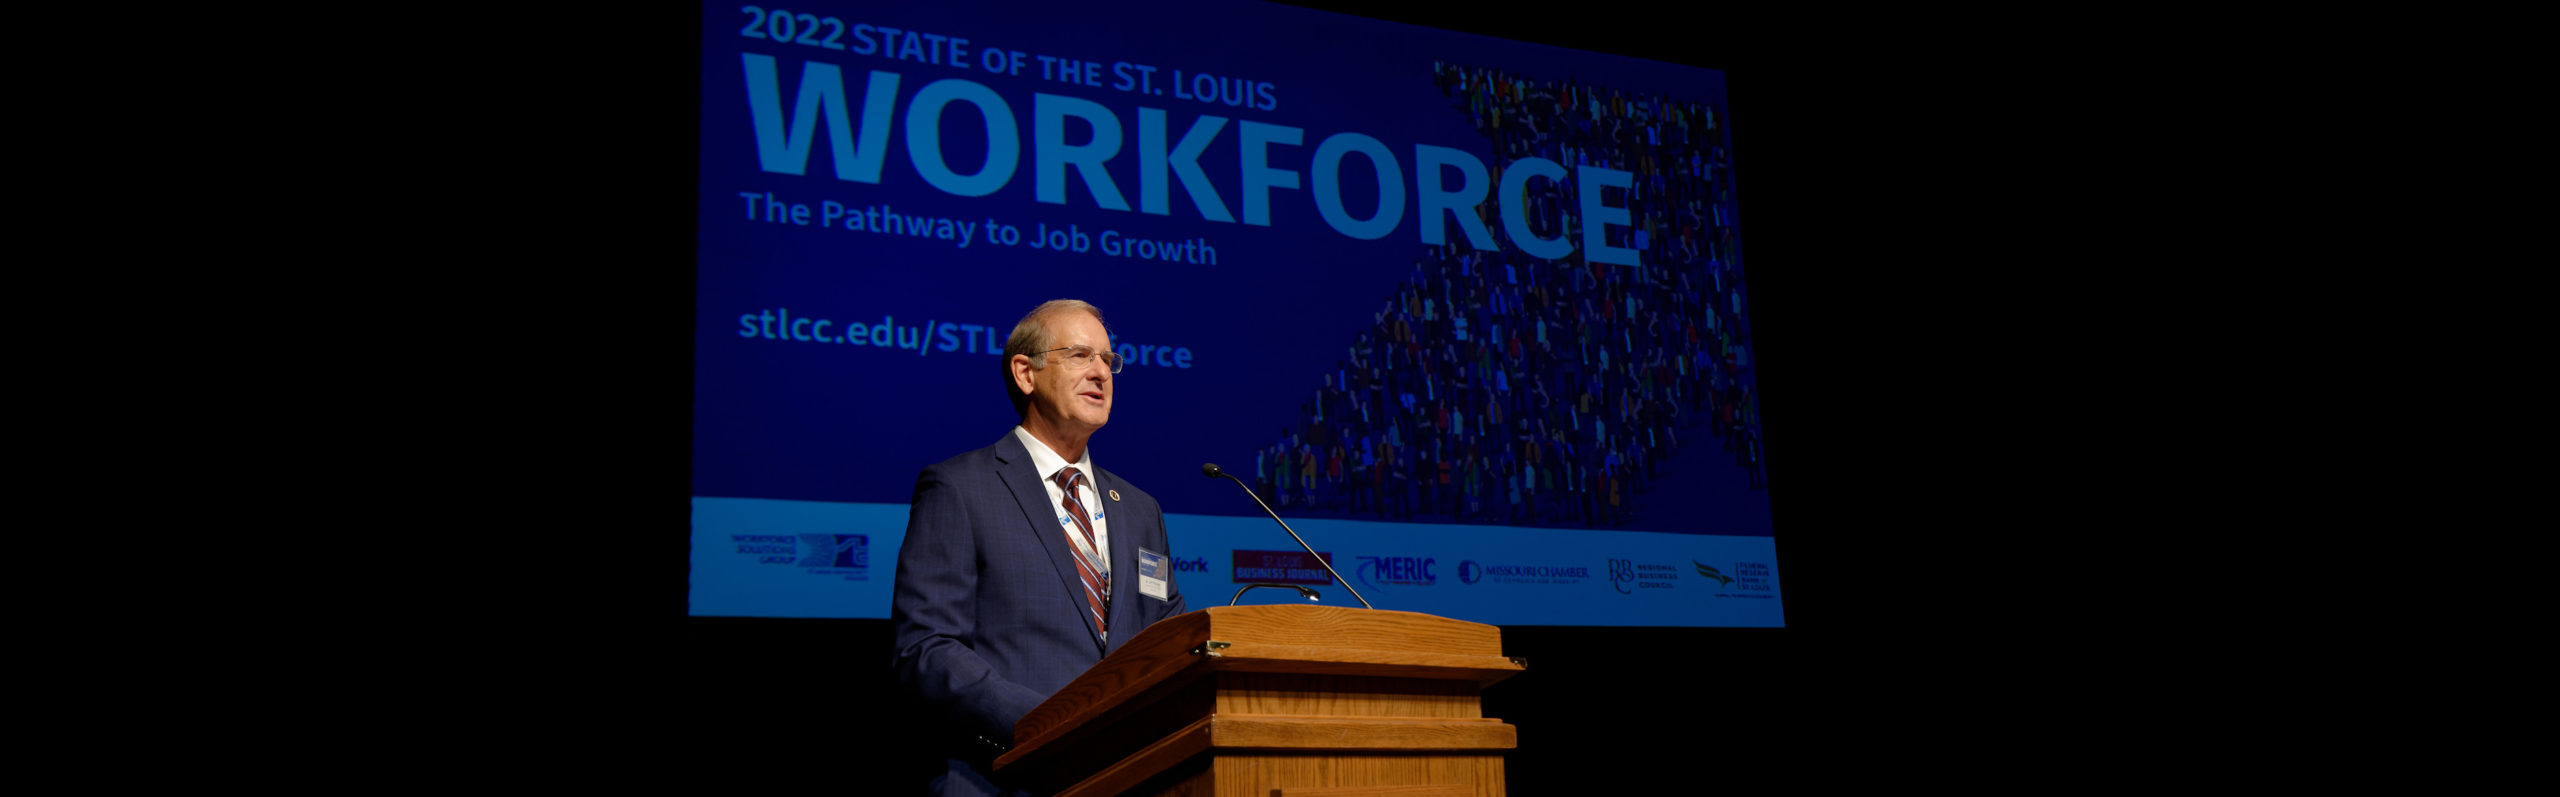 Dr. Jeff Pittman speaking at the 2022 State of the St. Louis Workforce event